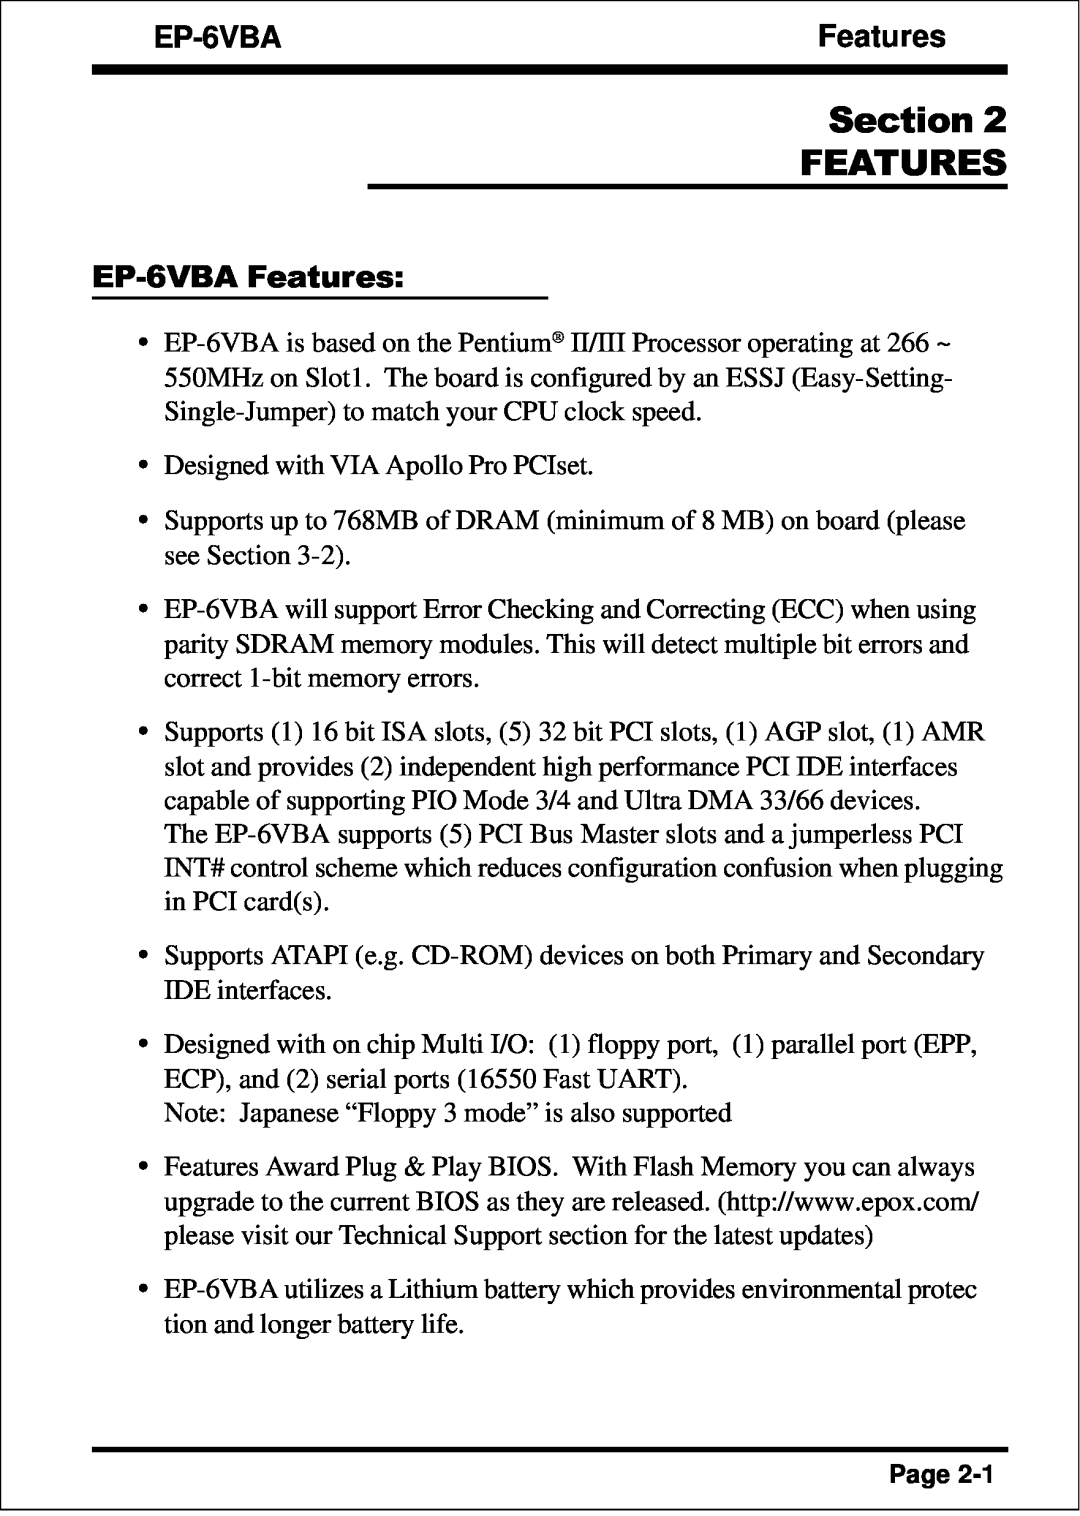 EPoX Computer specifications Section FEATURES, EP-6VBA Features 